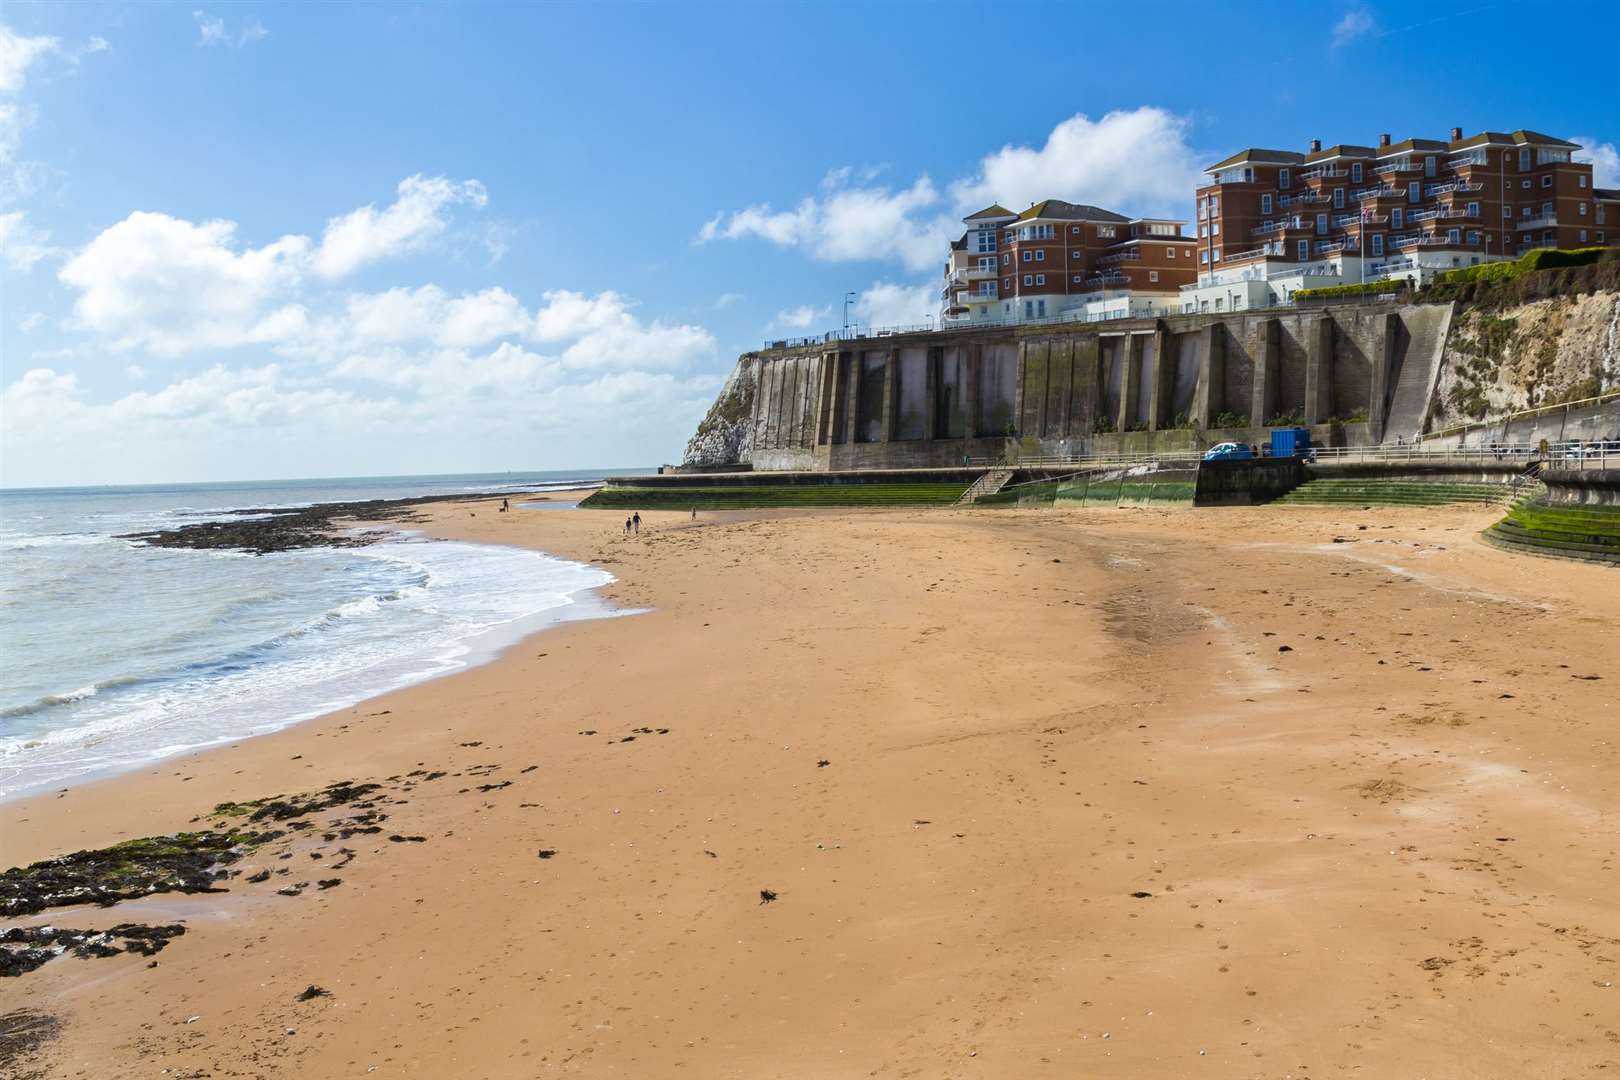 The sea at beaches in Broadstairs has been off limits